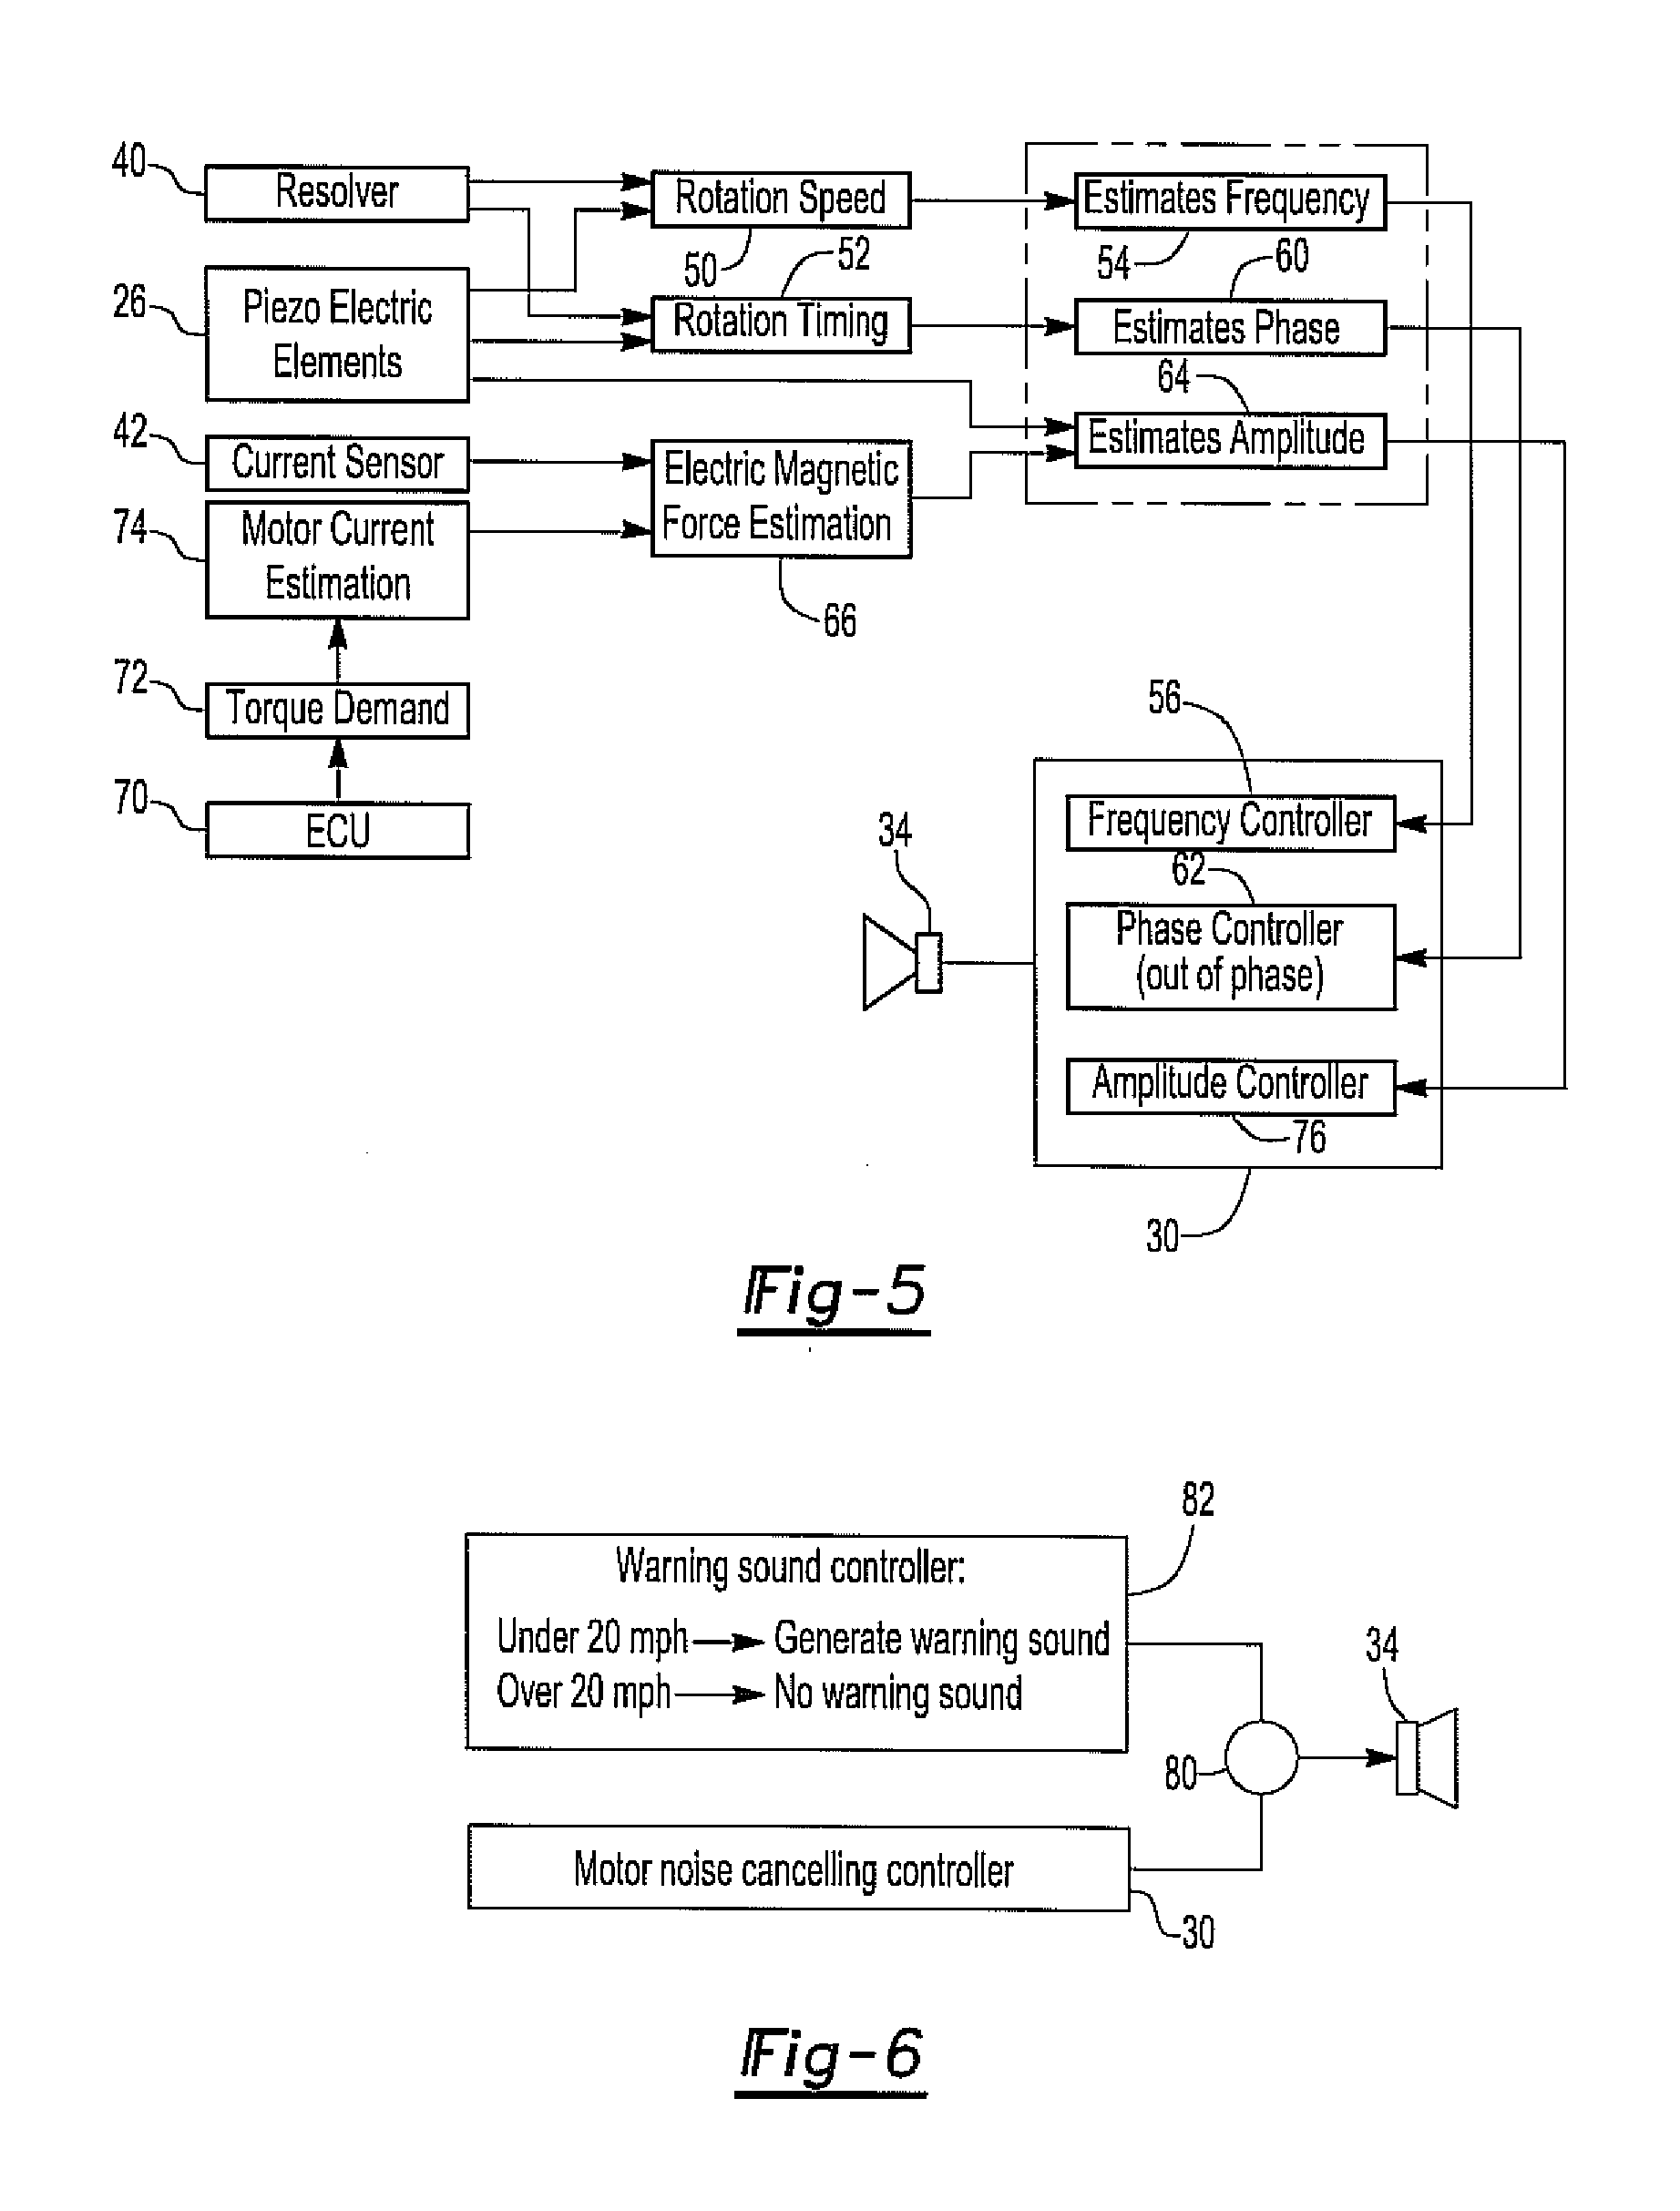 Noise reduction system for an electrically poered automotive vehicle